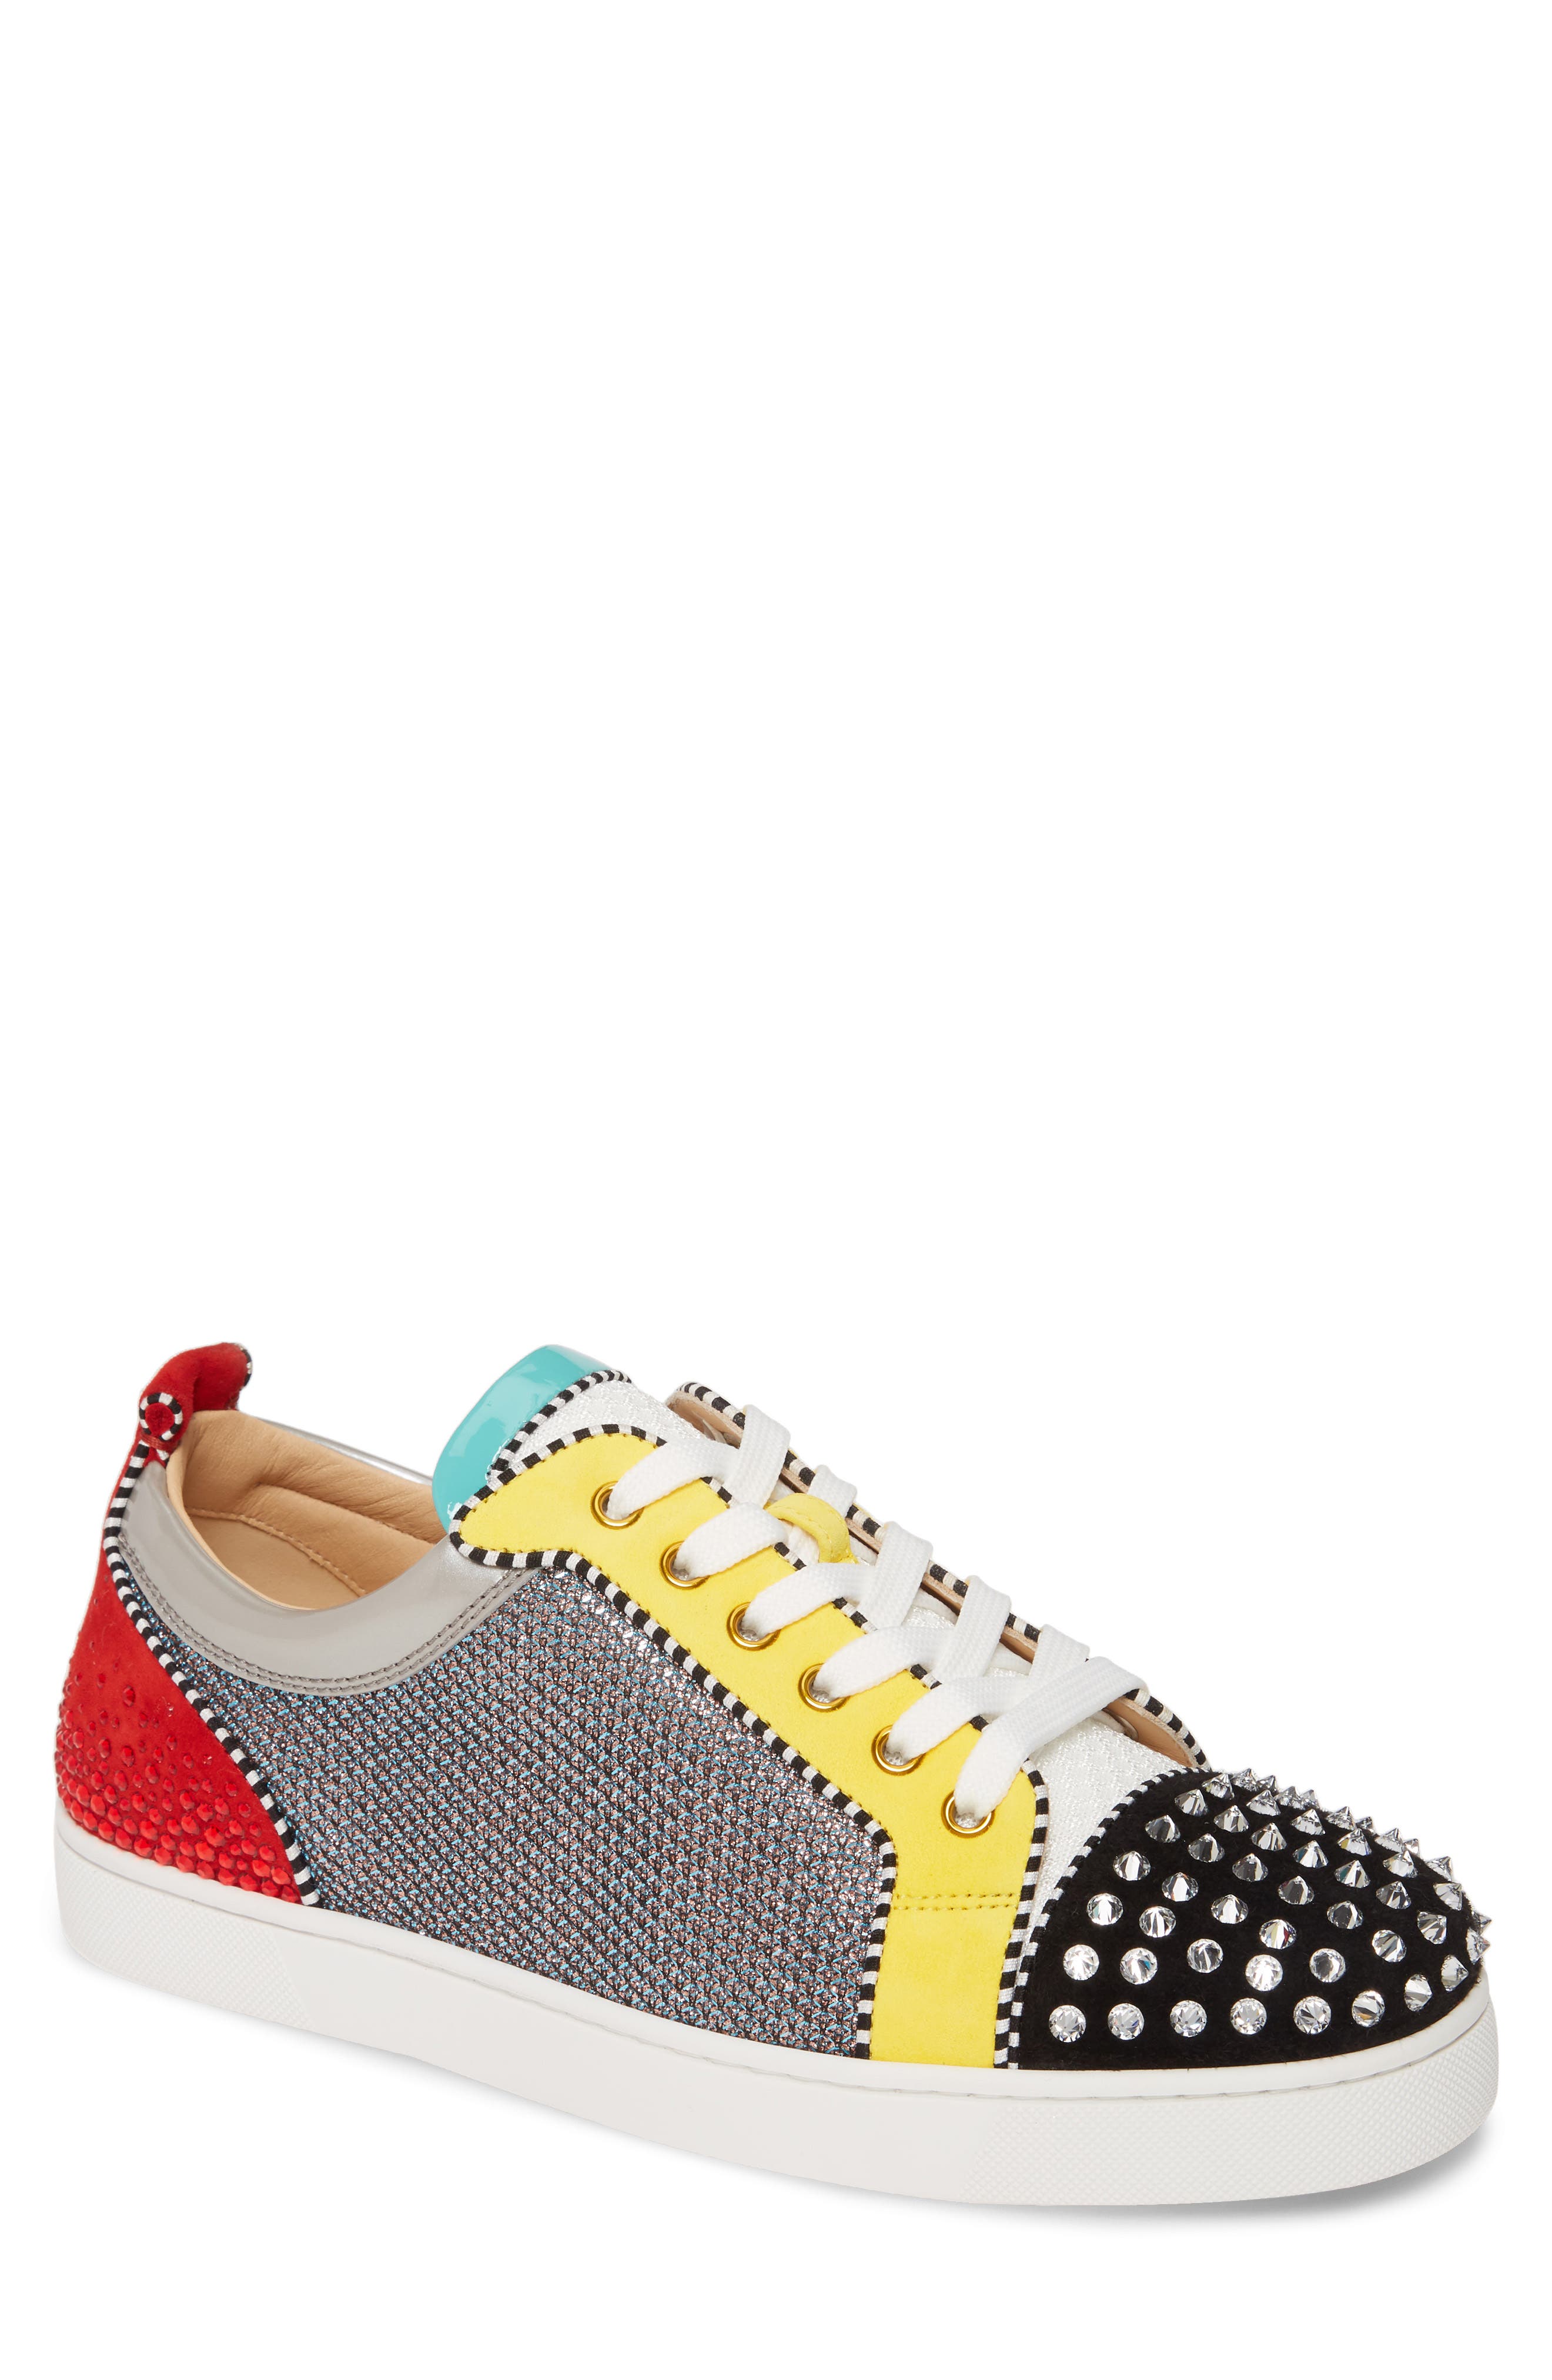 christian louboutin for toddlers